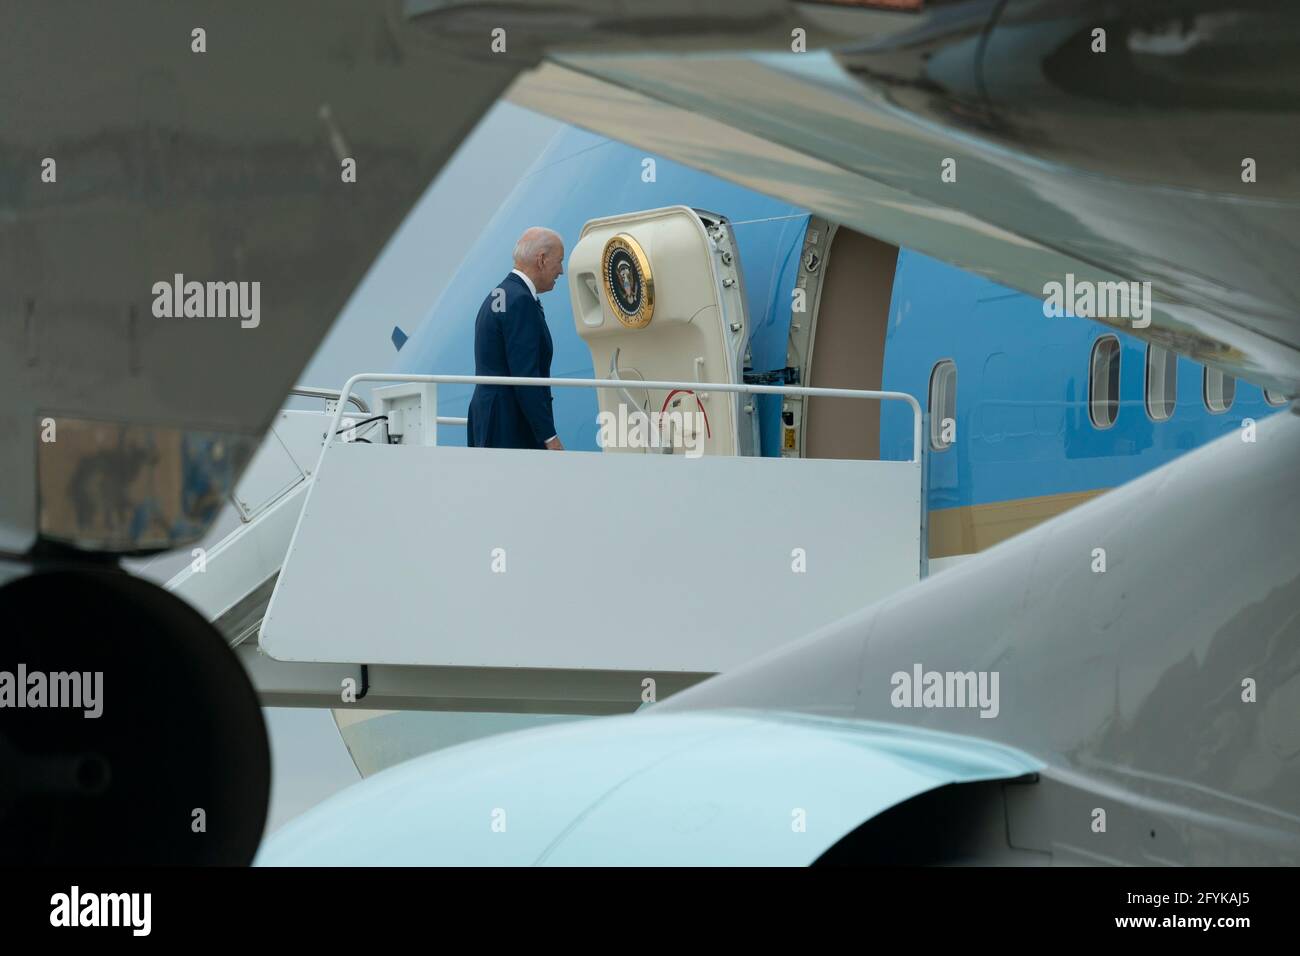 United States President Joe Biden boards Air Force One at Joint Base Andrews, to make remarks at Joint Base Langley-Eustis in Virginia, Friday, May 28, 2021. Credit: Chris Kleponis/Pool via CNP /MediaPunch Stock Photo